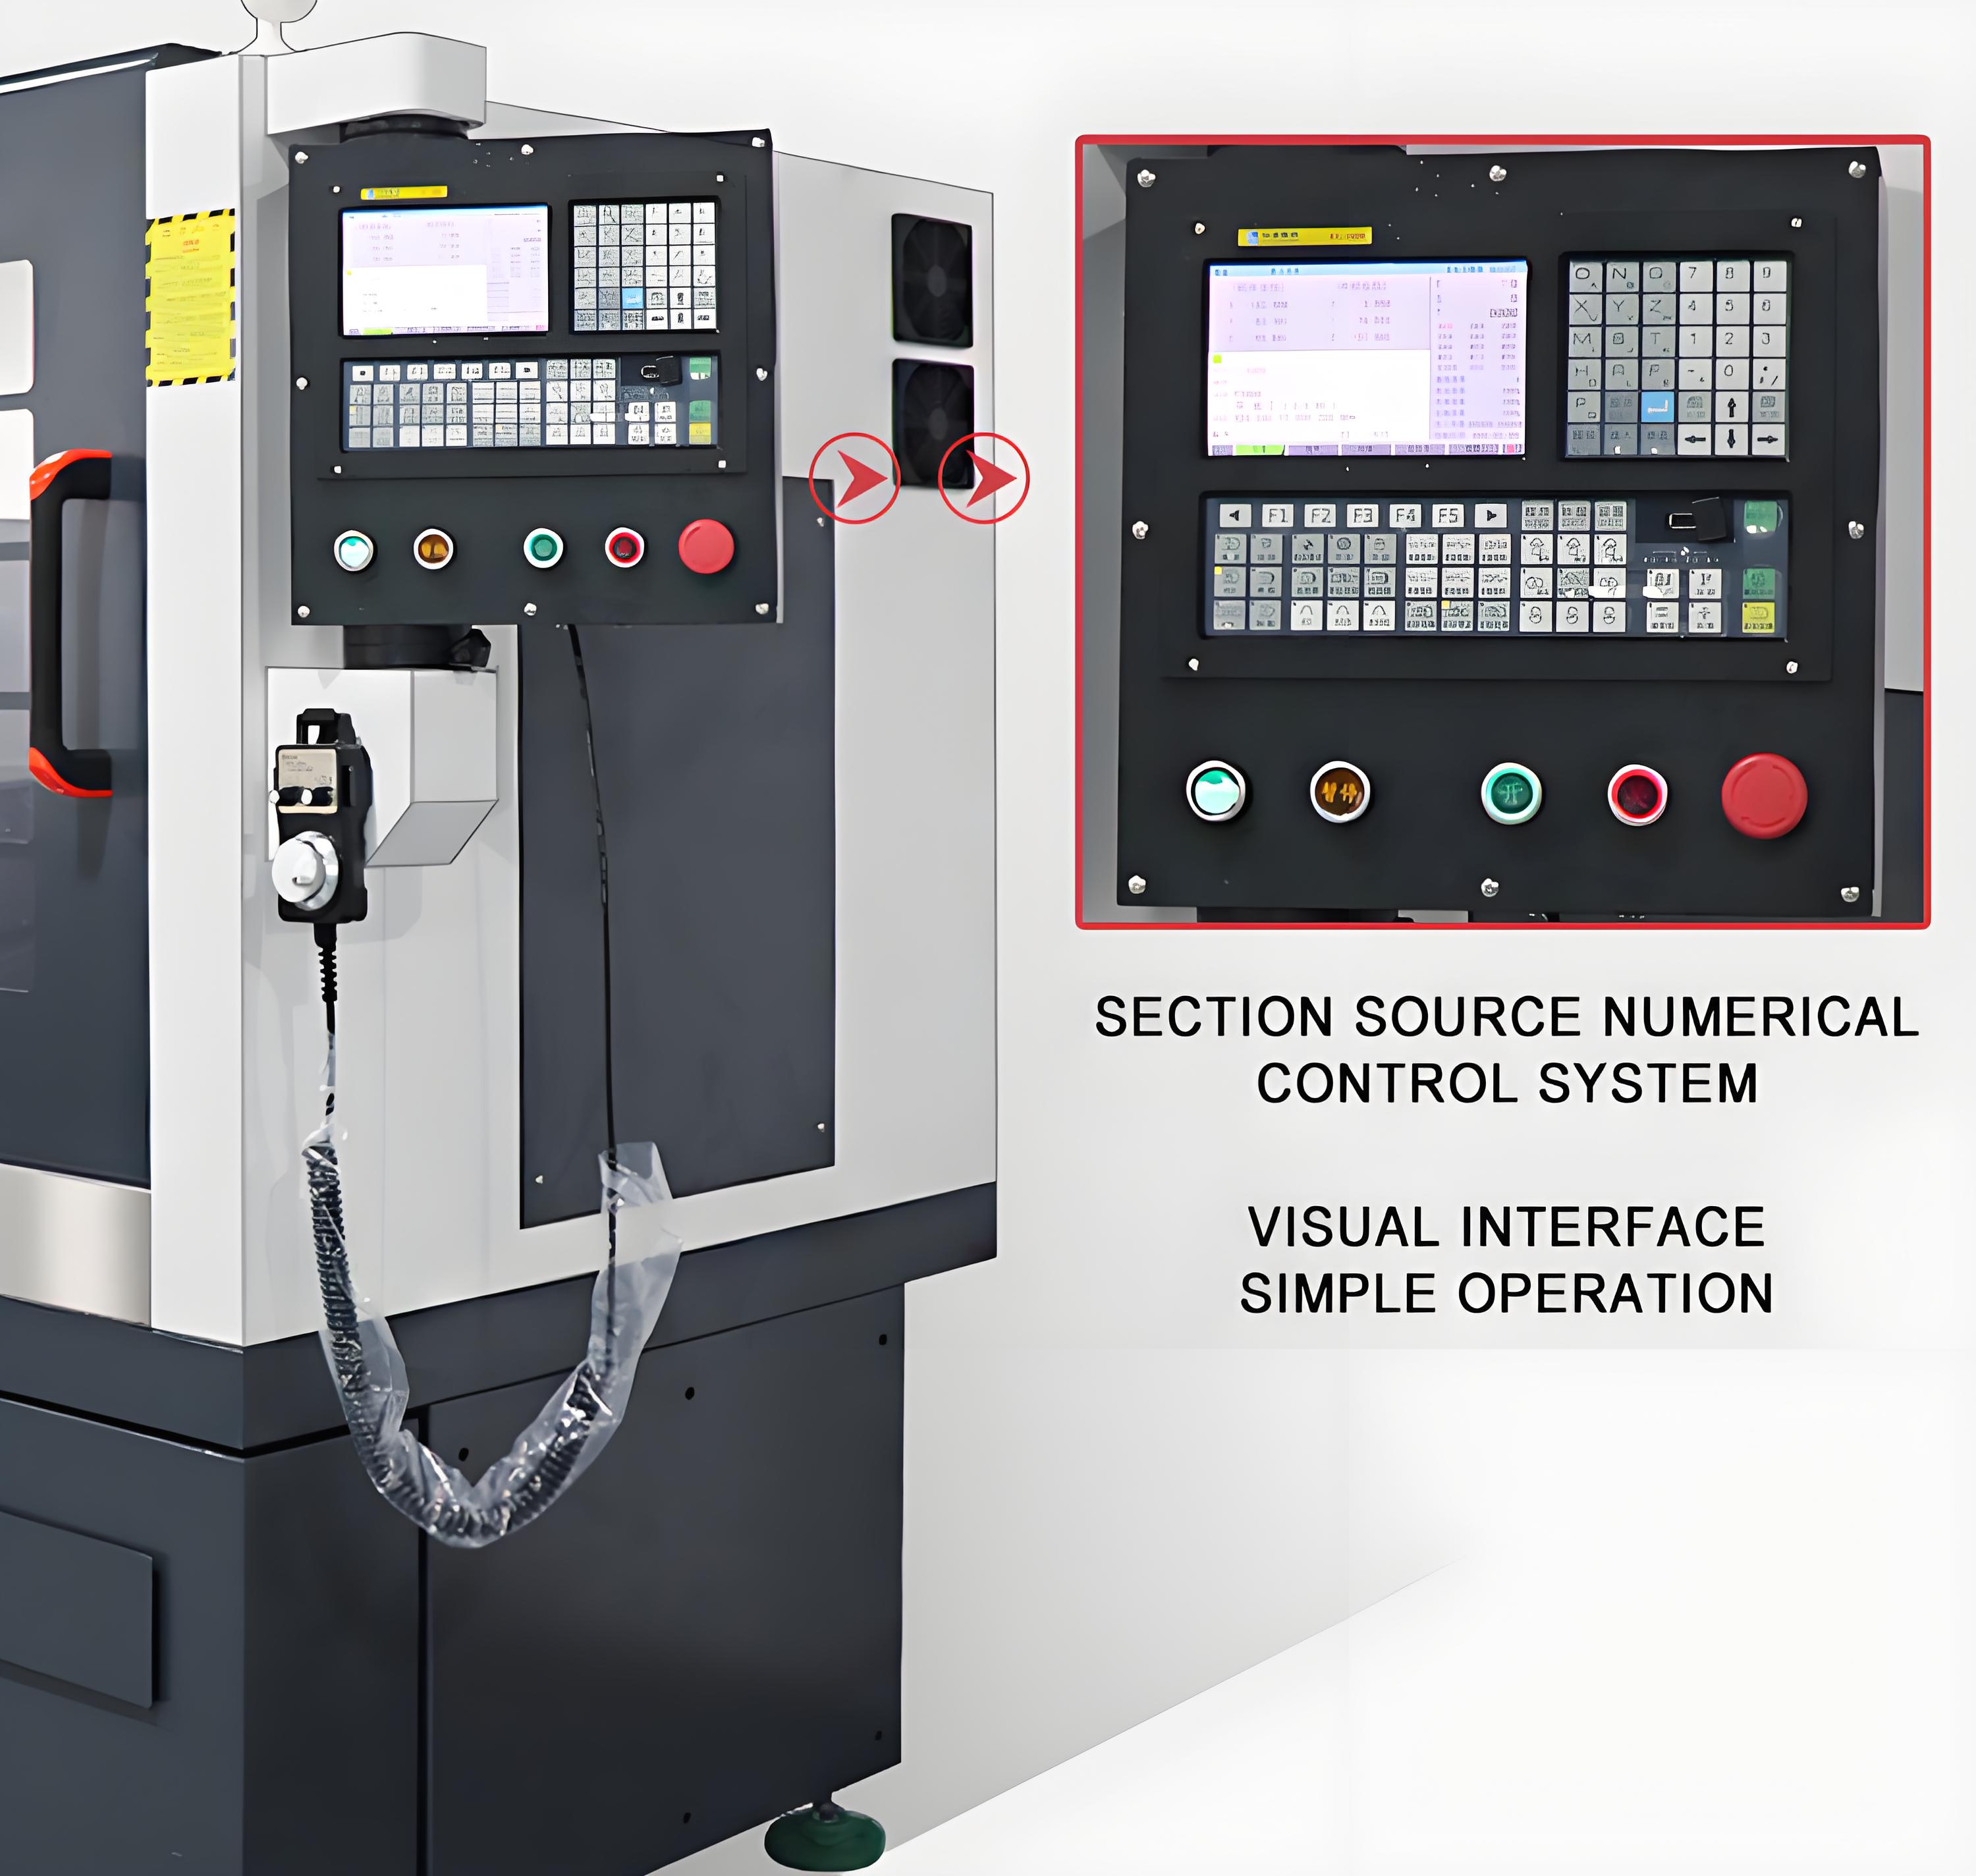 Section source numerical control system